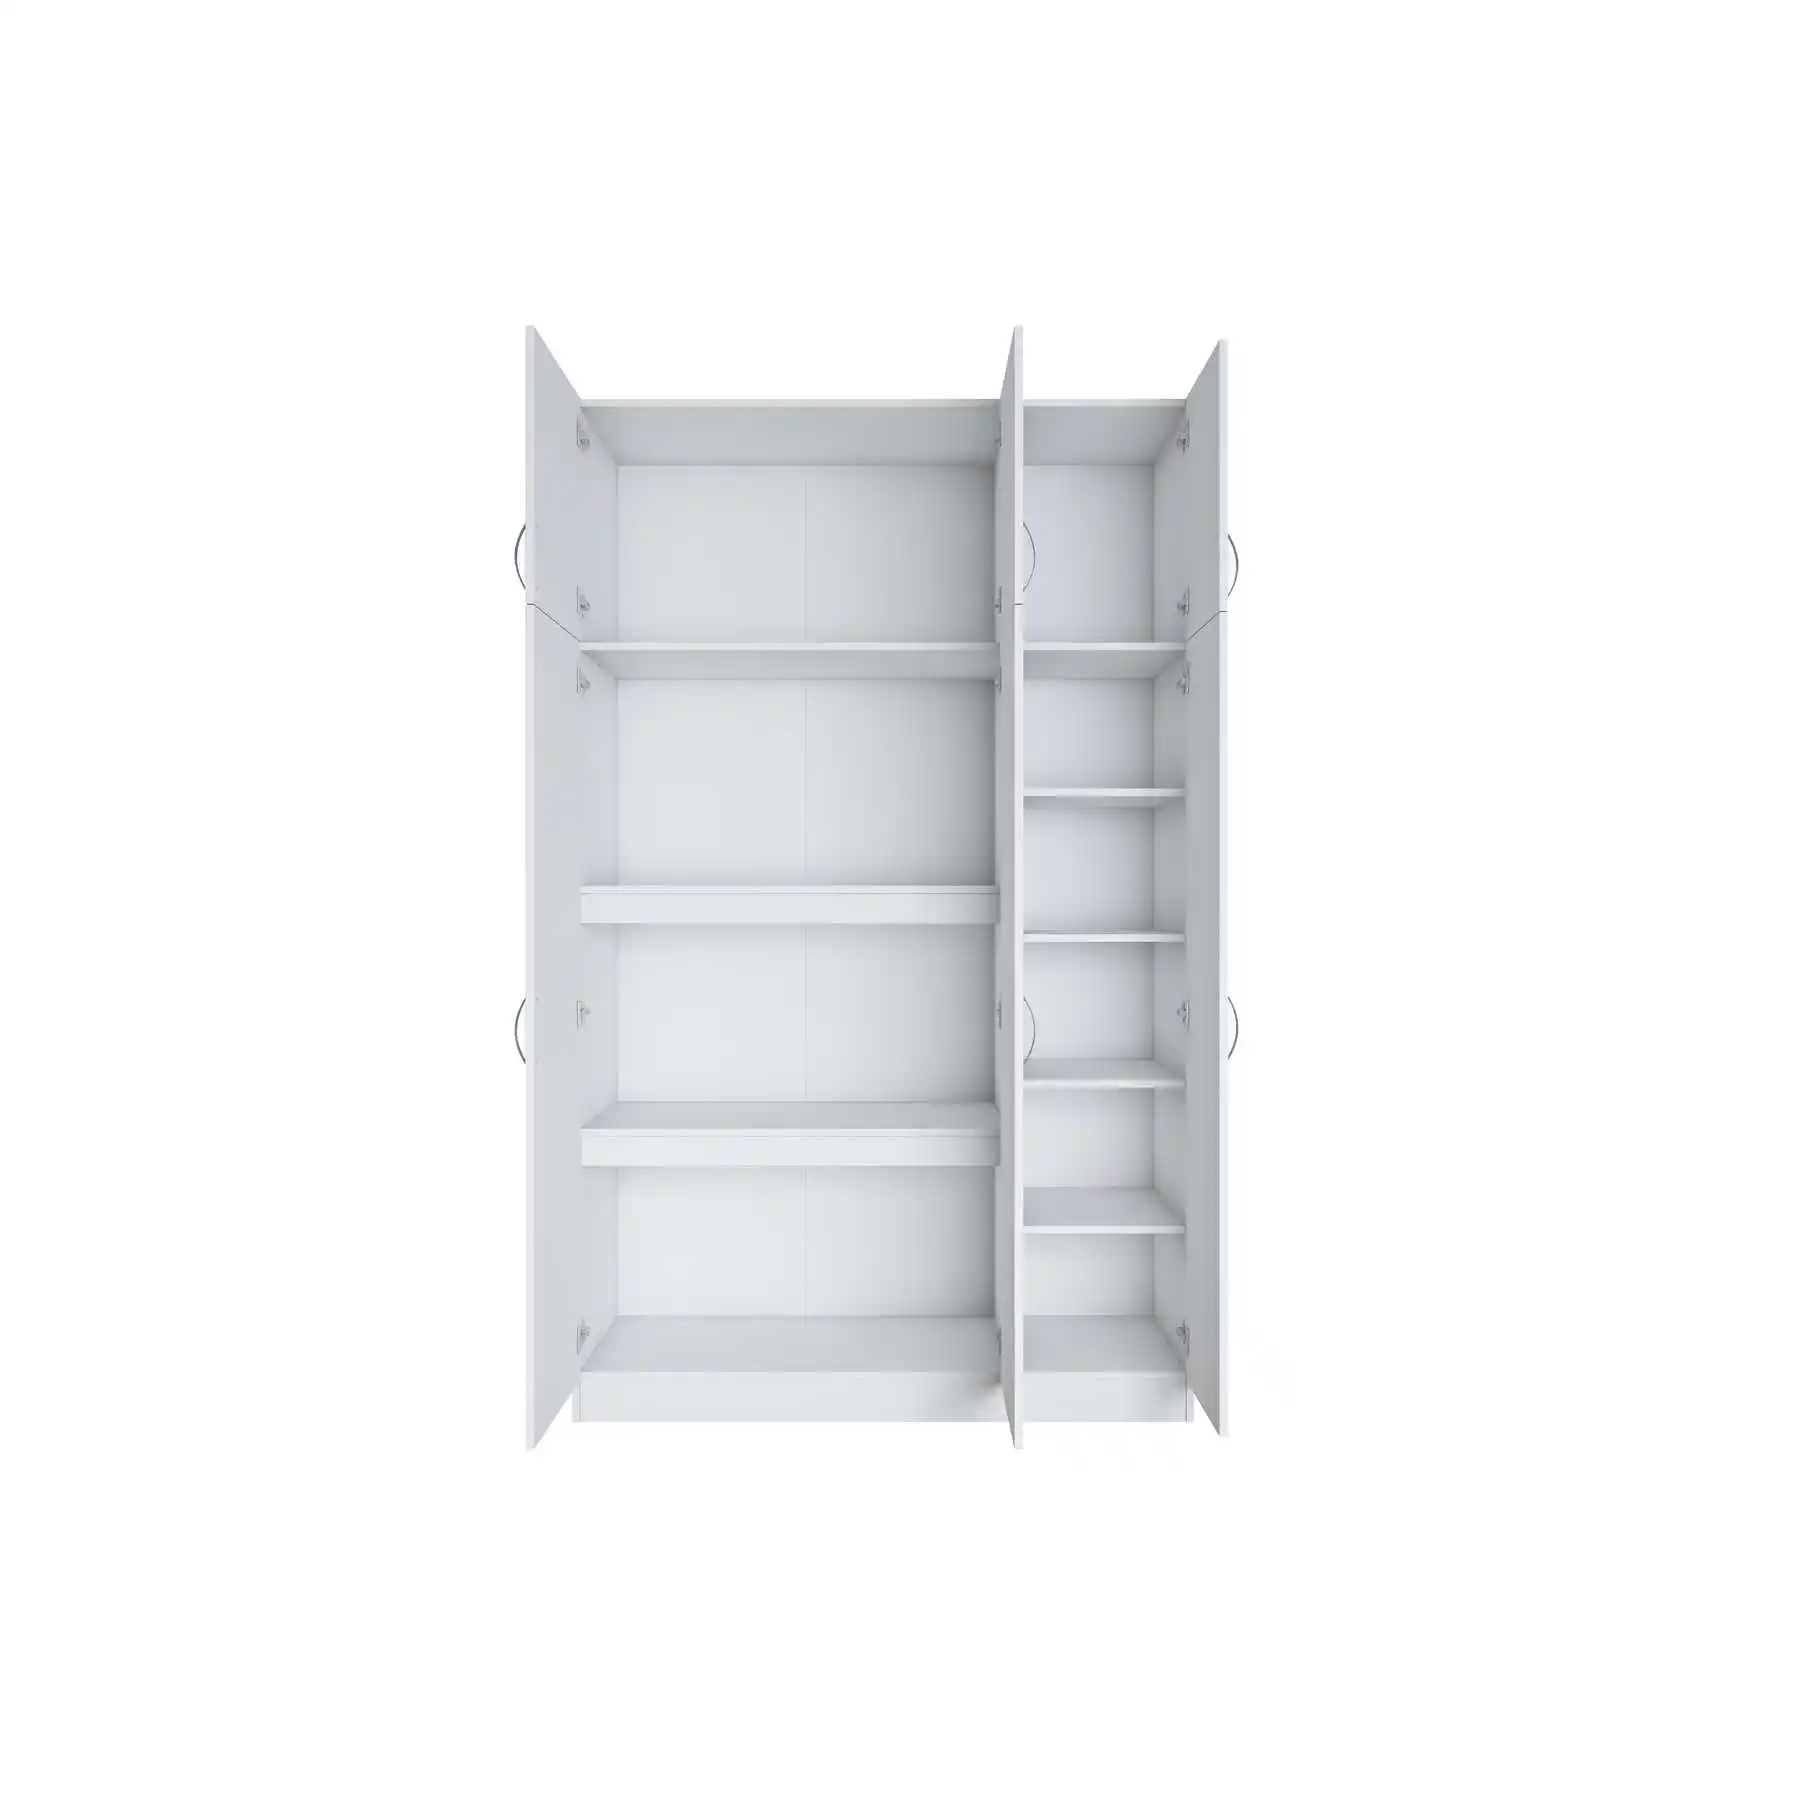 Rani BA104 Cupboard With Doors 239 cm White Wardrobe For Quilt Pillow Blanket Modern Design Wholesale Furniture 1989